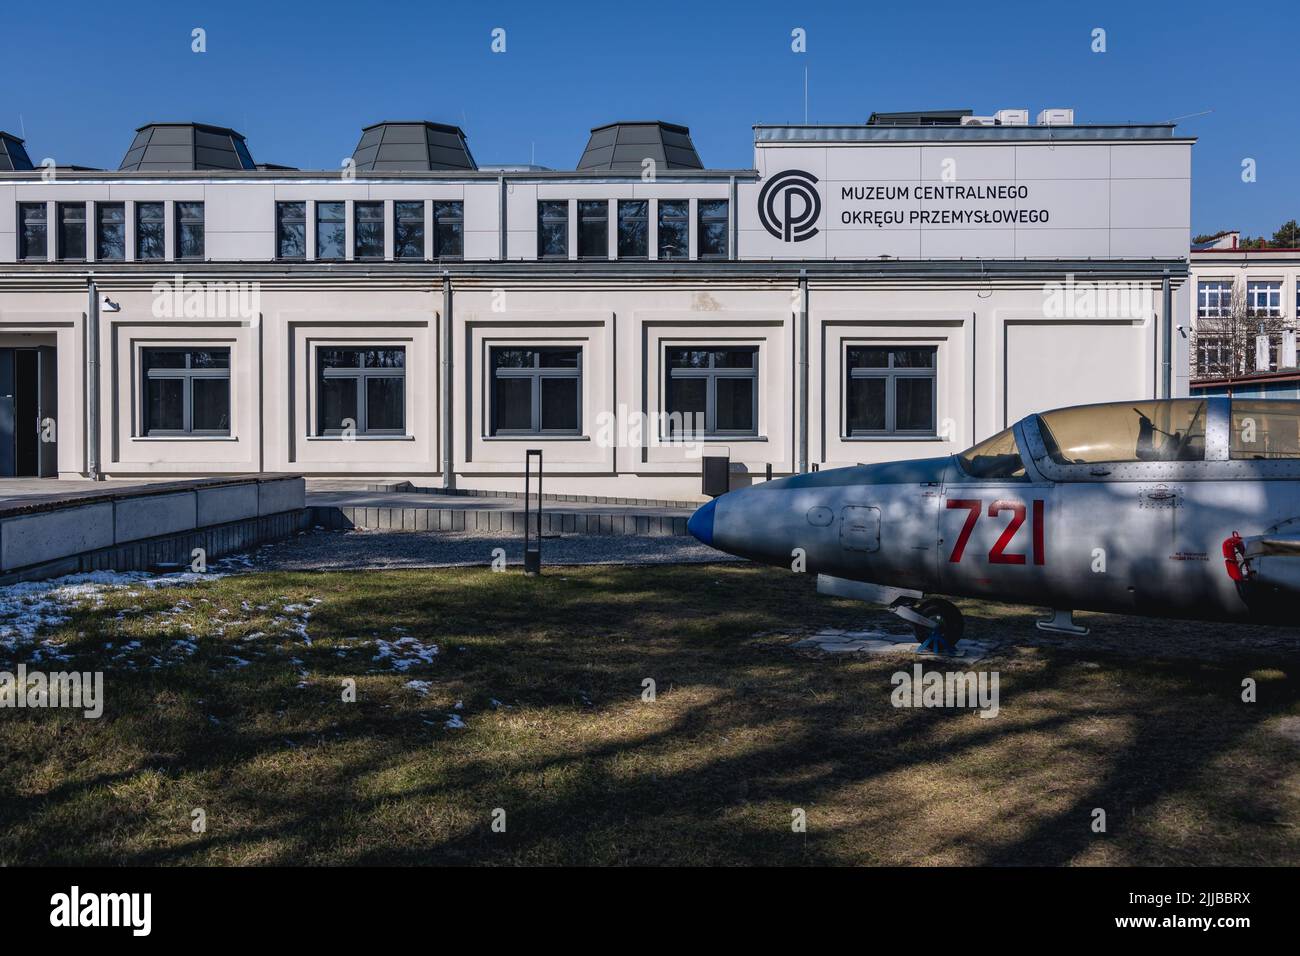 PZL TS-11 Iskra jet trainer in front of Museum of Central Industrial Region - COP in Stalowa Wola, Subcarpathian Voivodeship of Poland Stock Photo